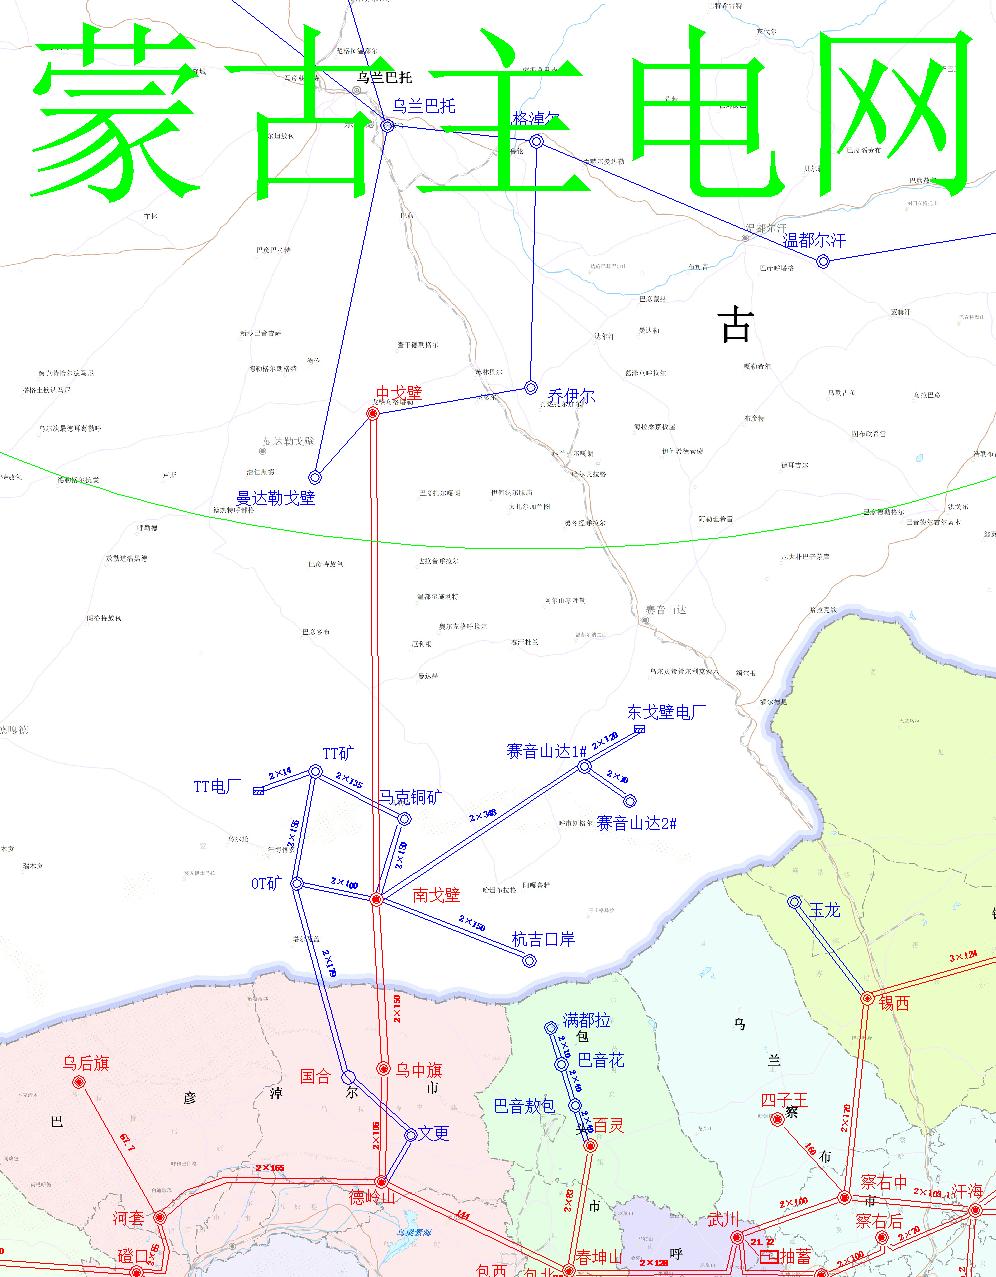 2.4 Interconnection plans Inner Mongolia grid and Mongolia grid Grid plan